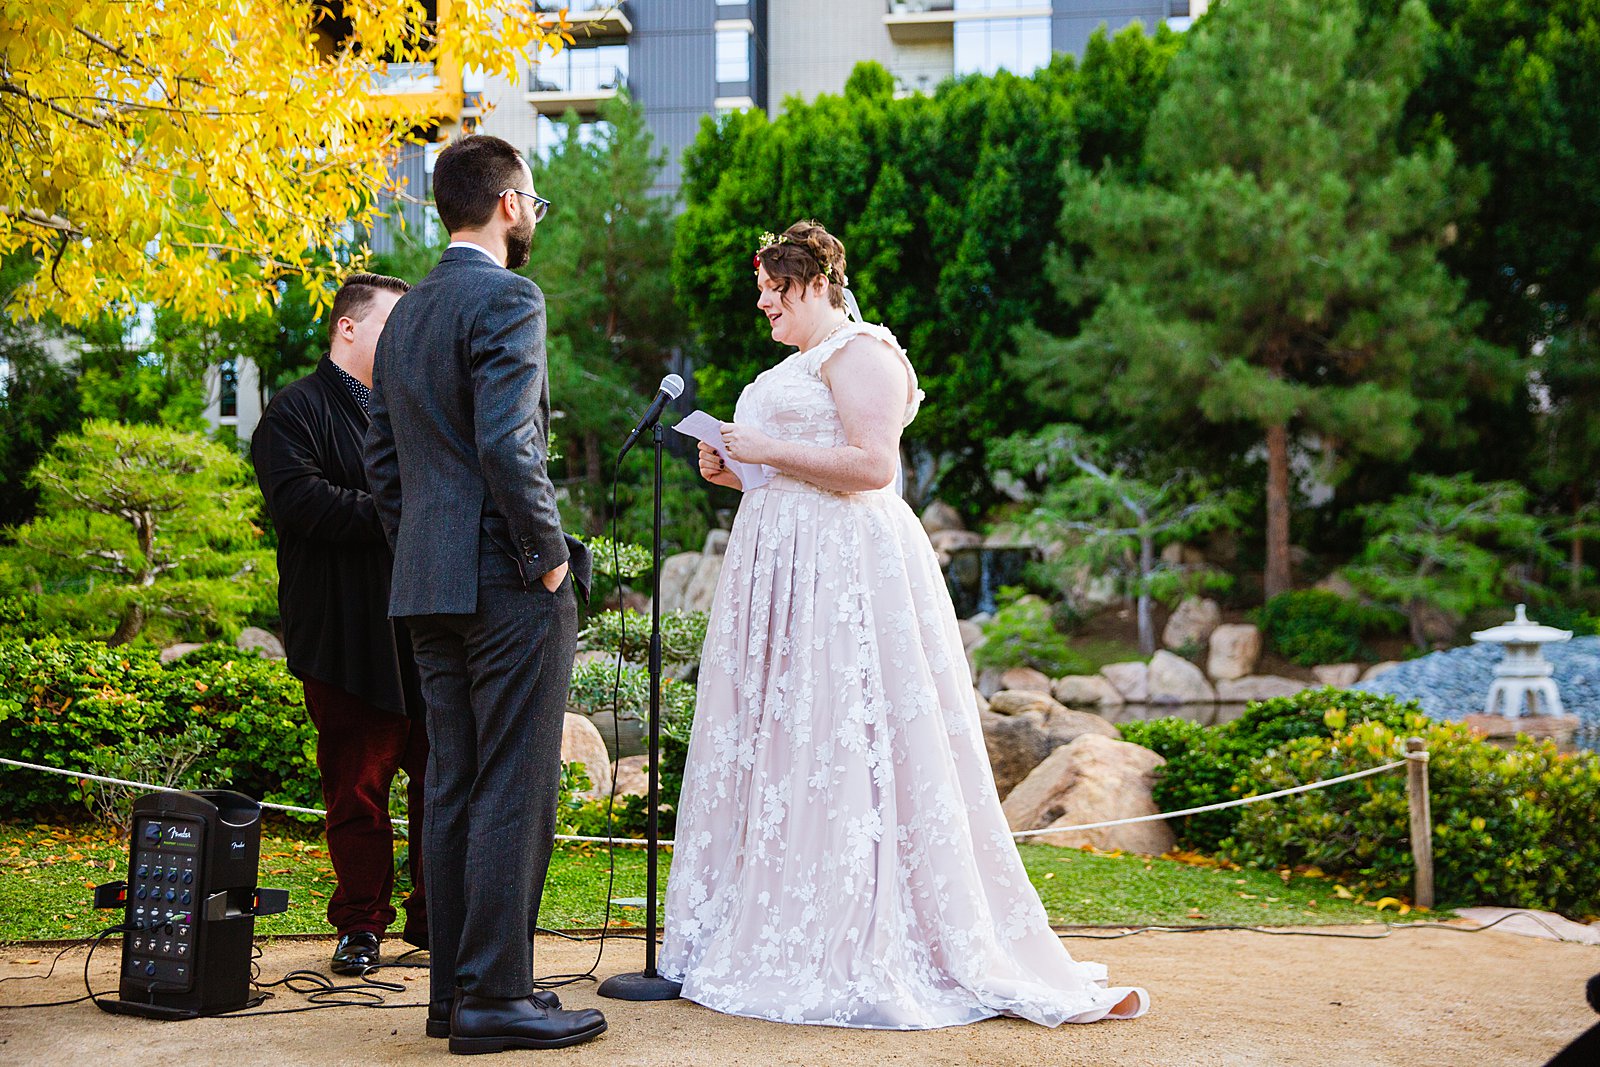 Bride reading vows to her groom during their wedding ceremony at Japanese Friendship Garden by Phoenix wedding photographer PMA Photography.